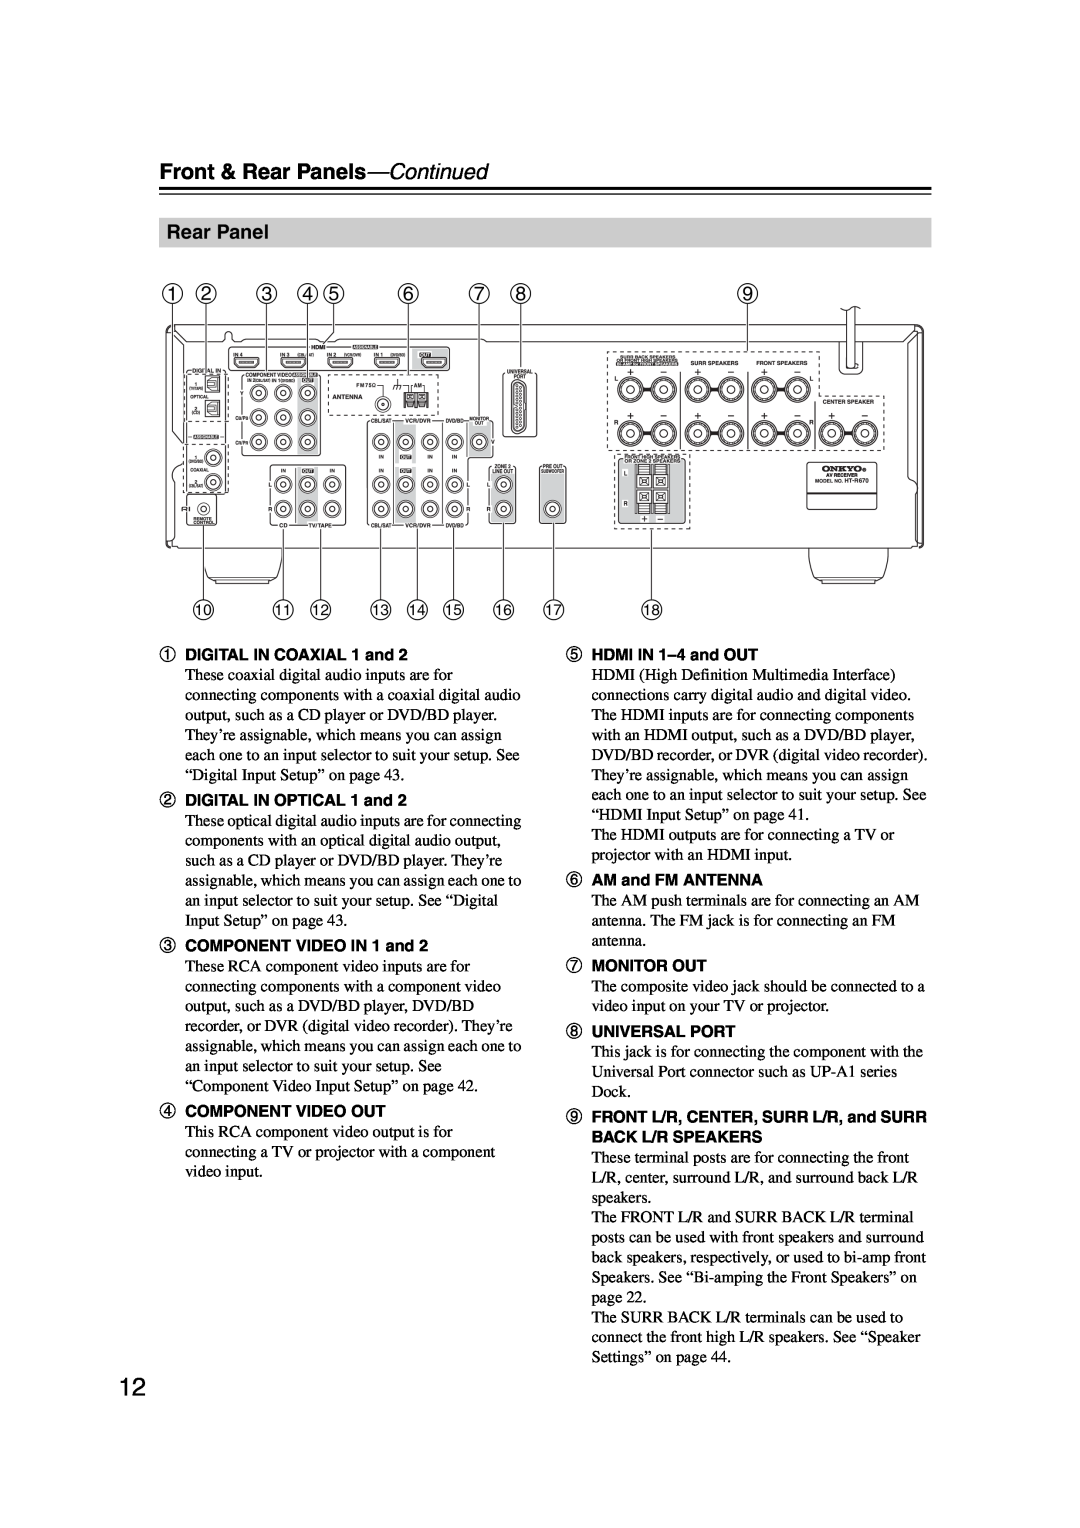 Onkyo 29344937, HT-S6200 instruction manual a b c de f g h, j k l m n o p, Front & Rear Panels-Continued 